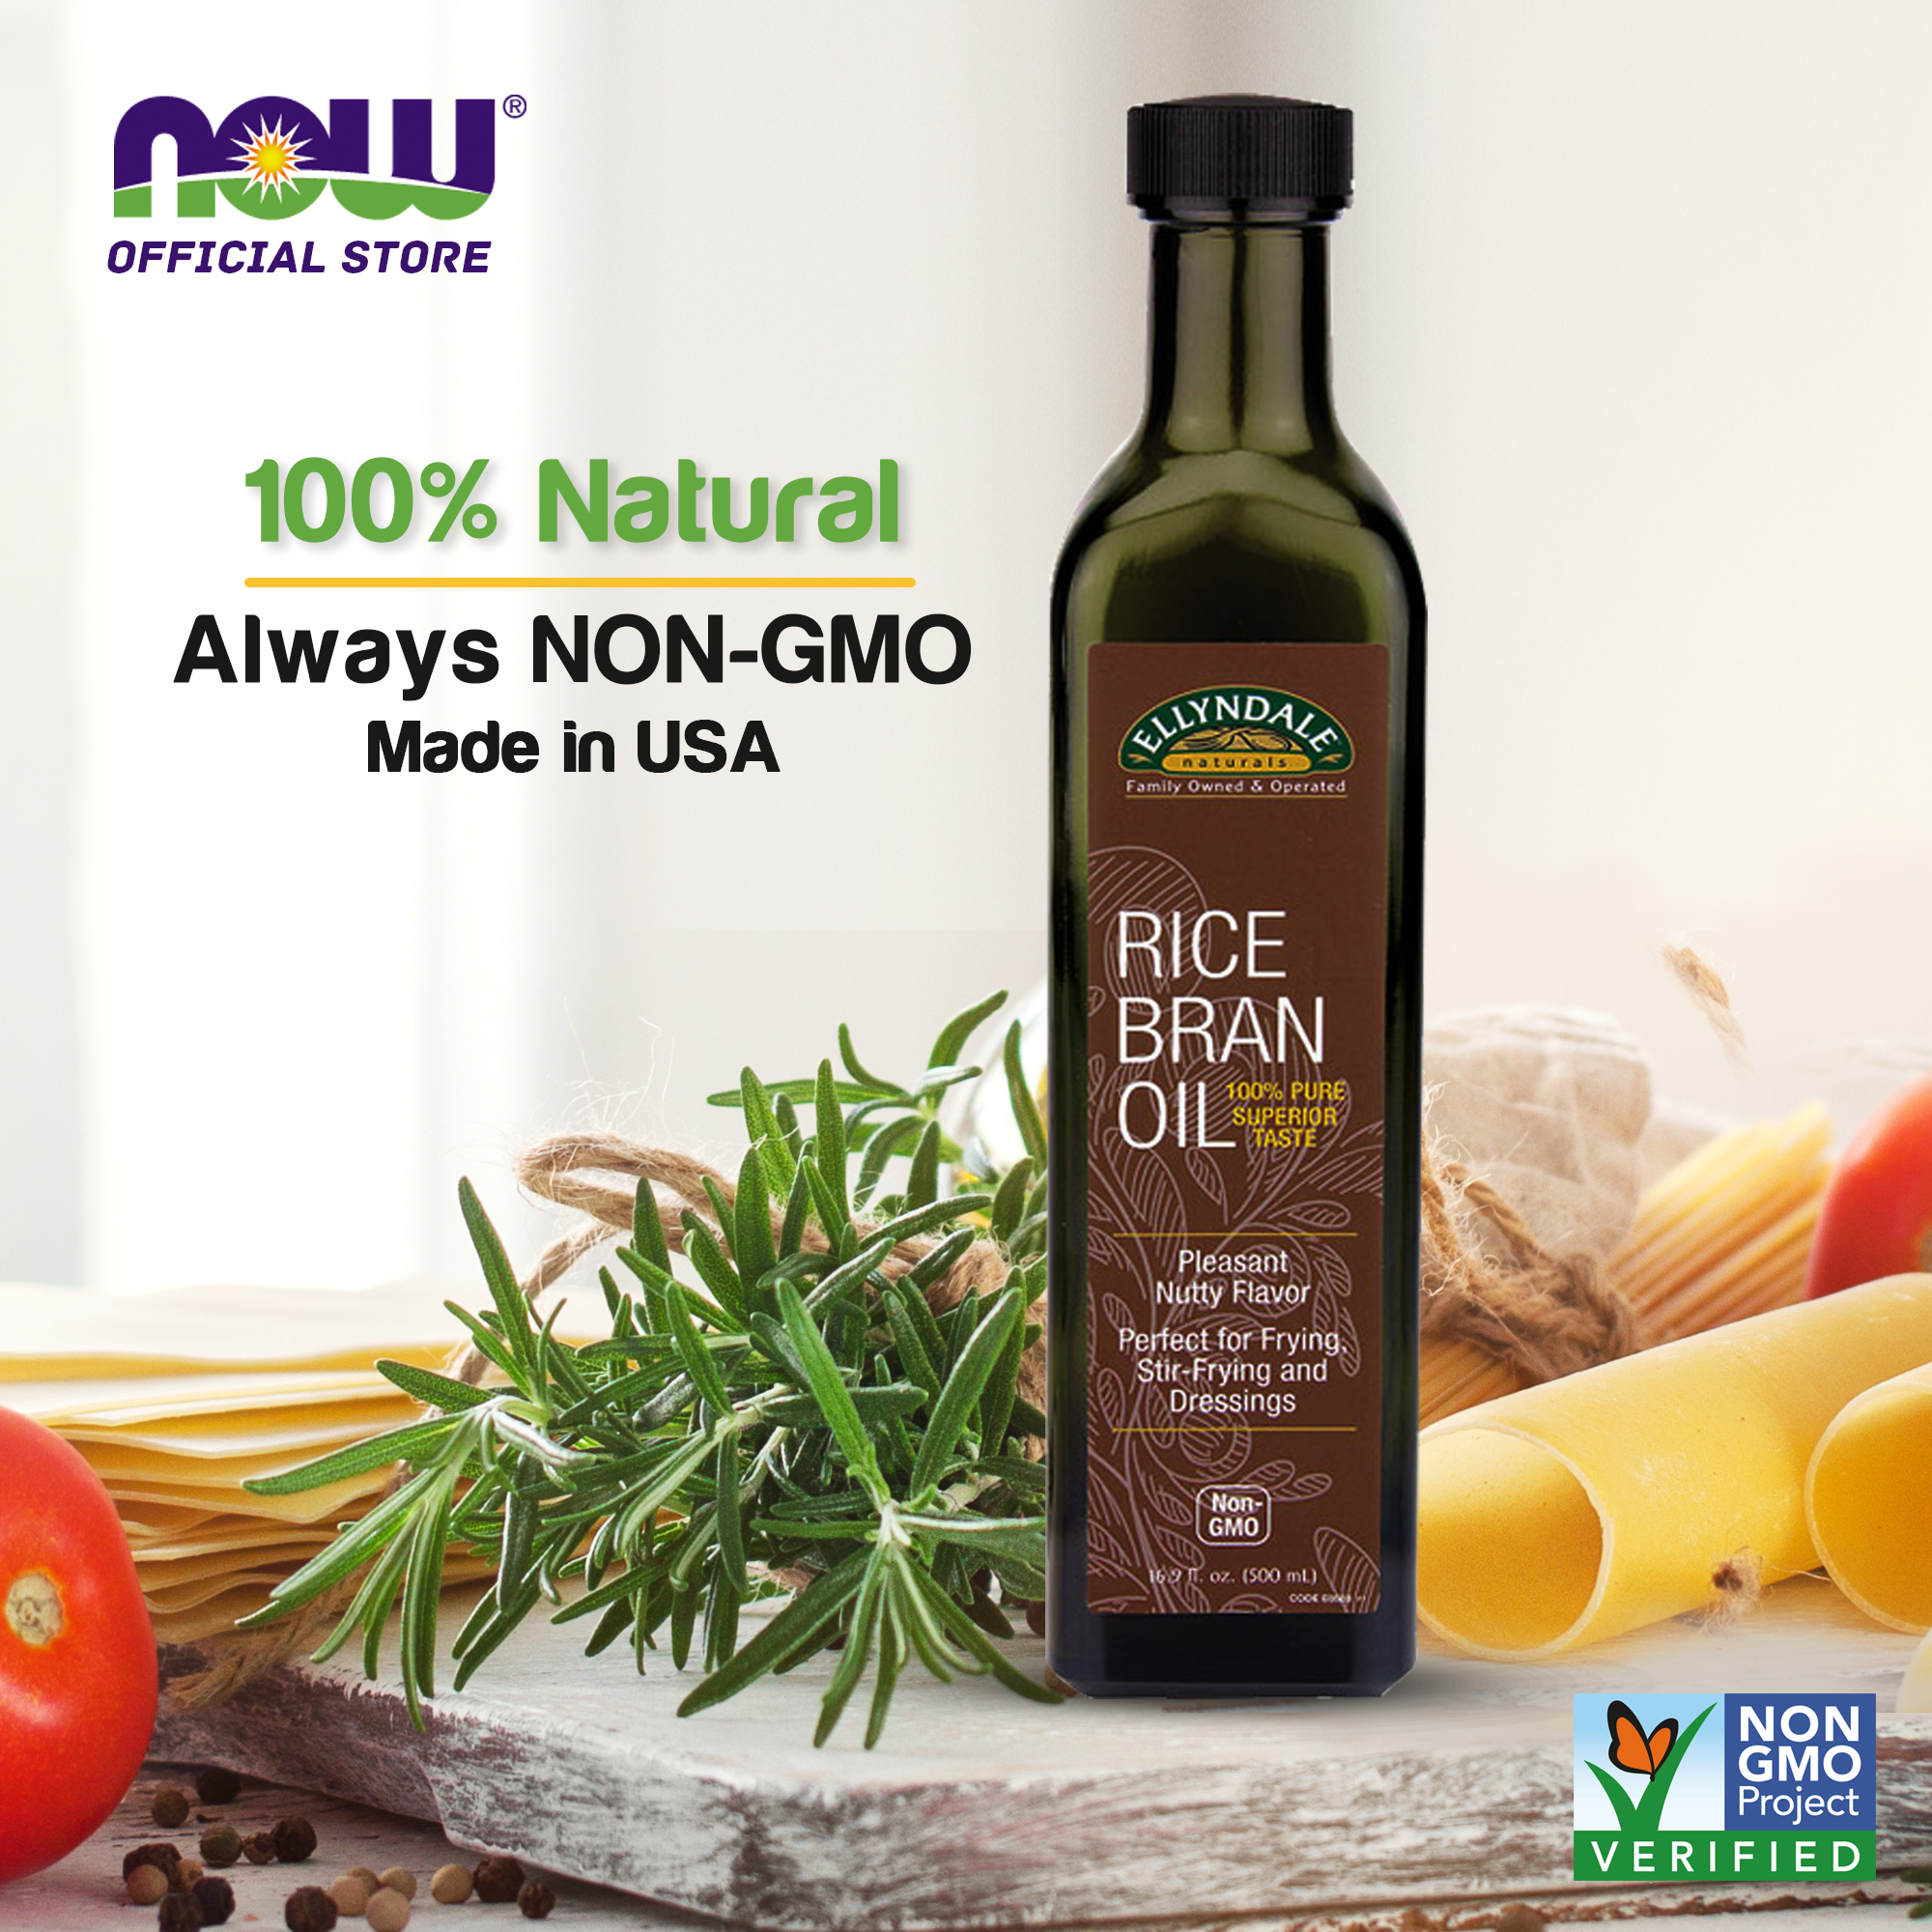 RICE BRAN OIL, 1 Gallon (128 Ounces), Kosher, All- Natural, Made from  100% Non-GMO Rice, Rich in Vit E and Gamma Oryzanol, Unfiltered, No Trans  Fat and Heart Healthy